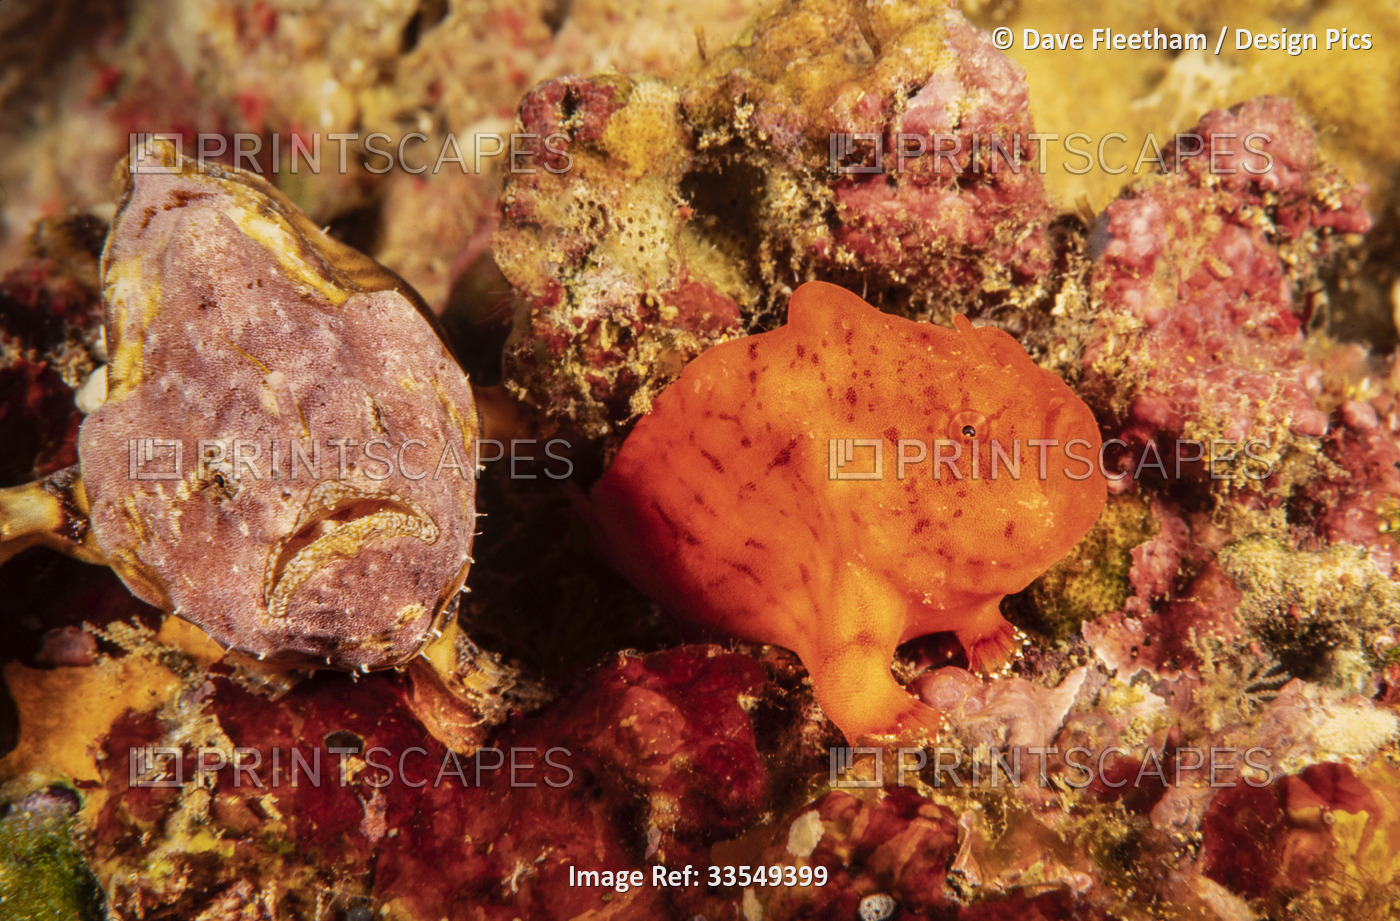 Despite the differences in appearance, both of these are Reticulated frogfish ...